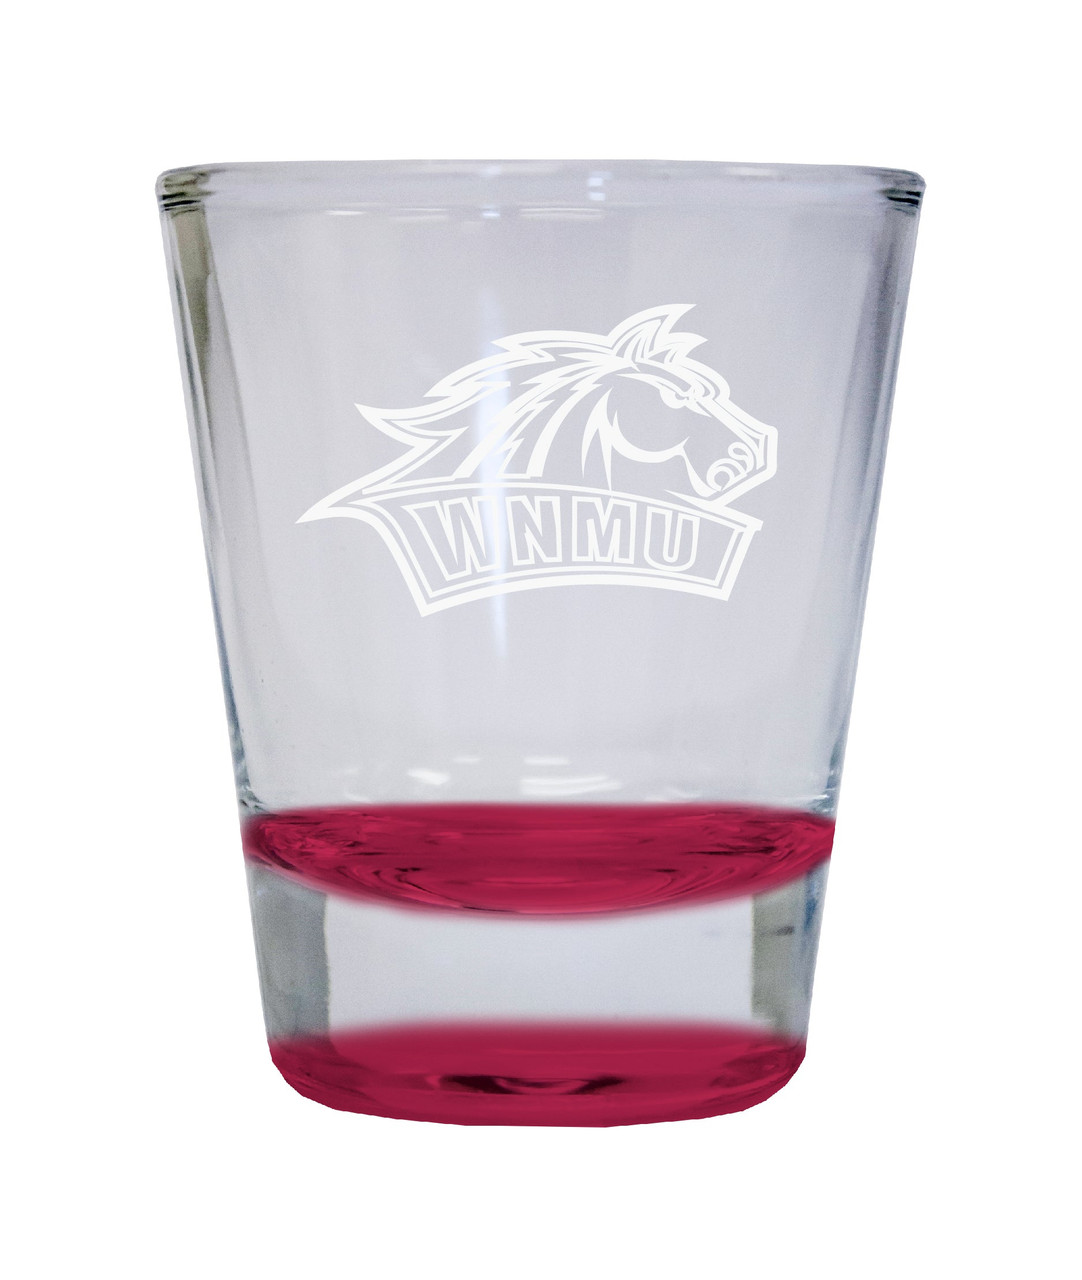 Western New Mexico University Etched Round Shot Glass 2 oz Red